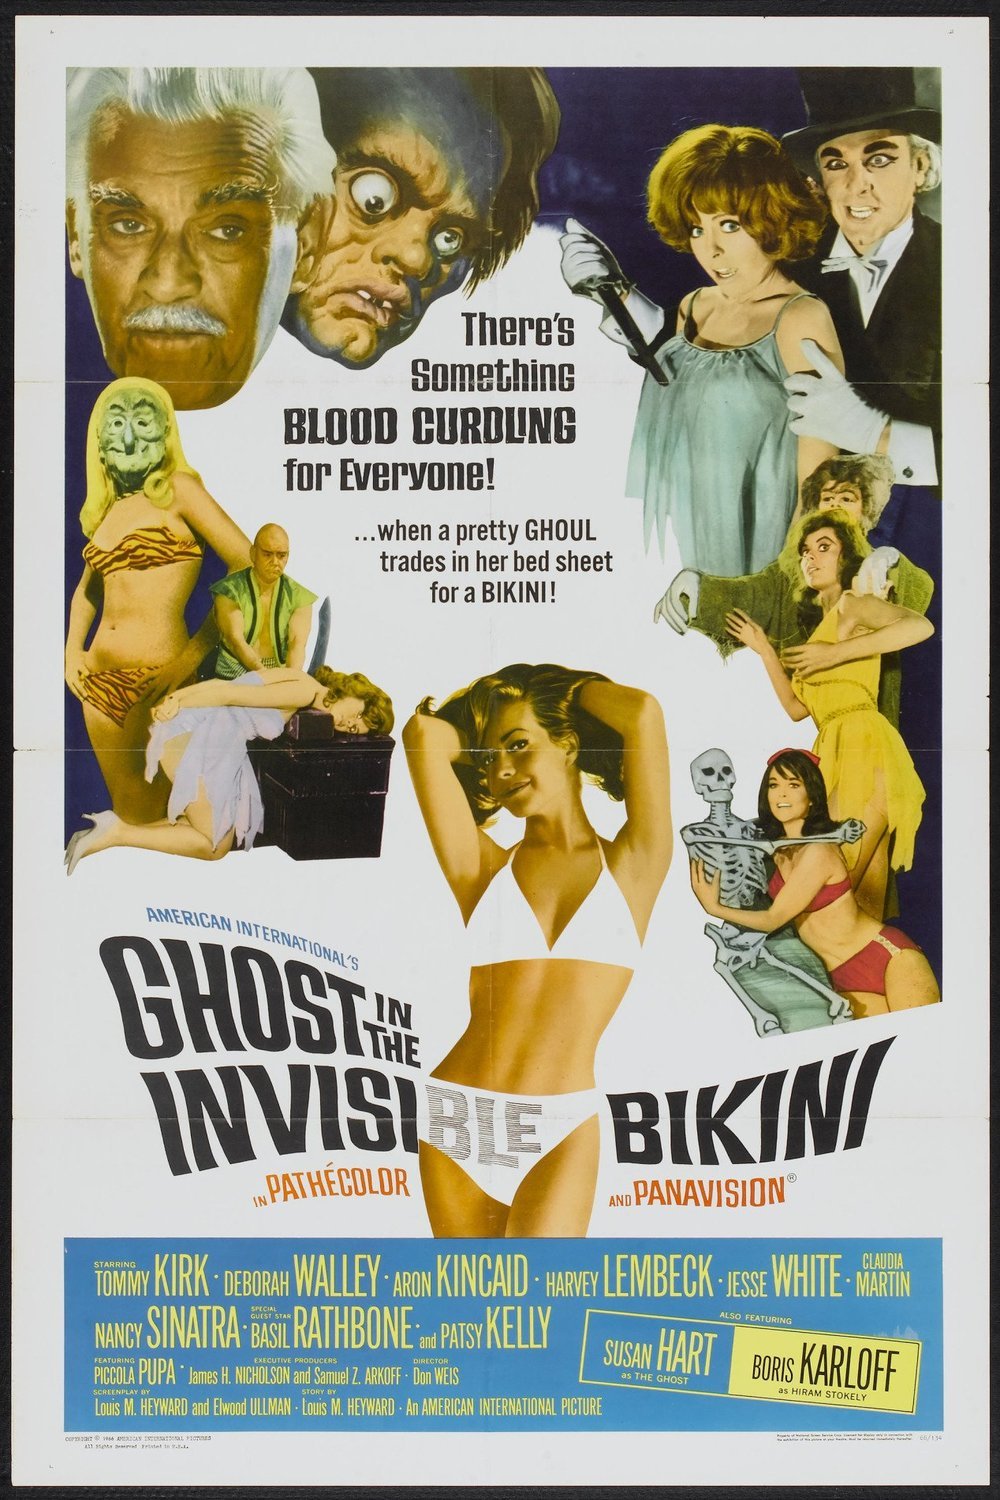 Poster of the movie The Ghost in the Invisible Bikini